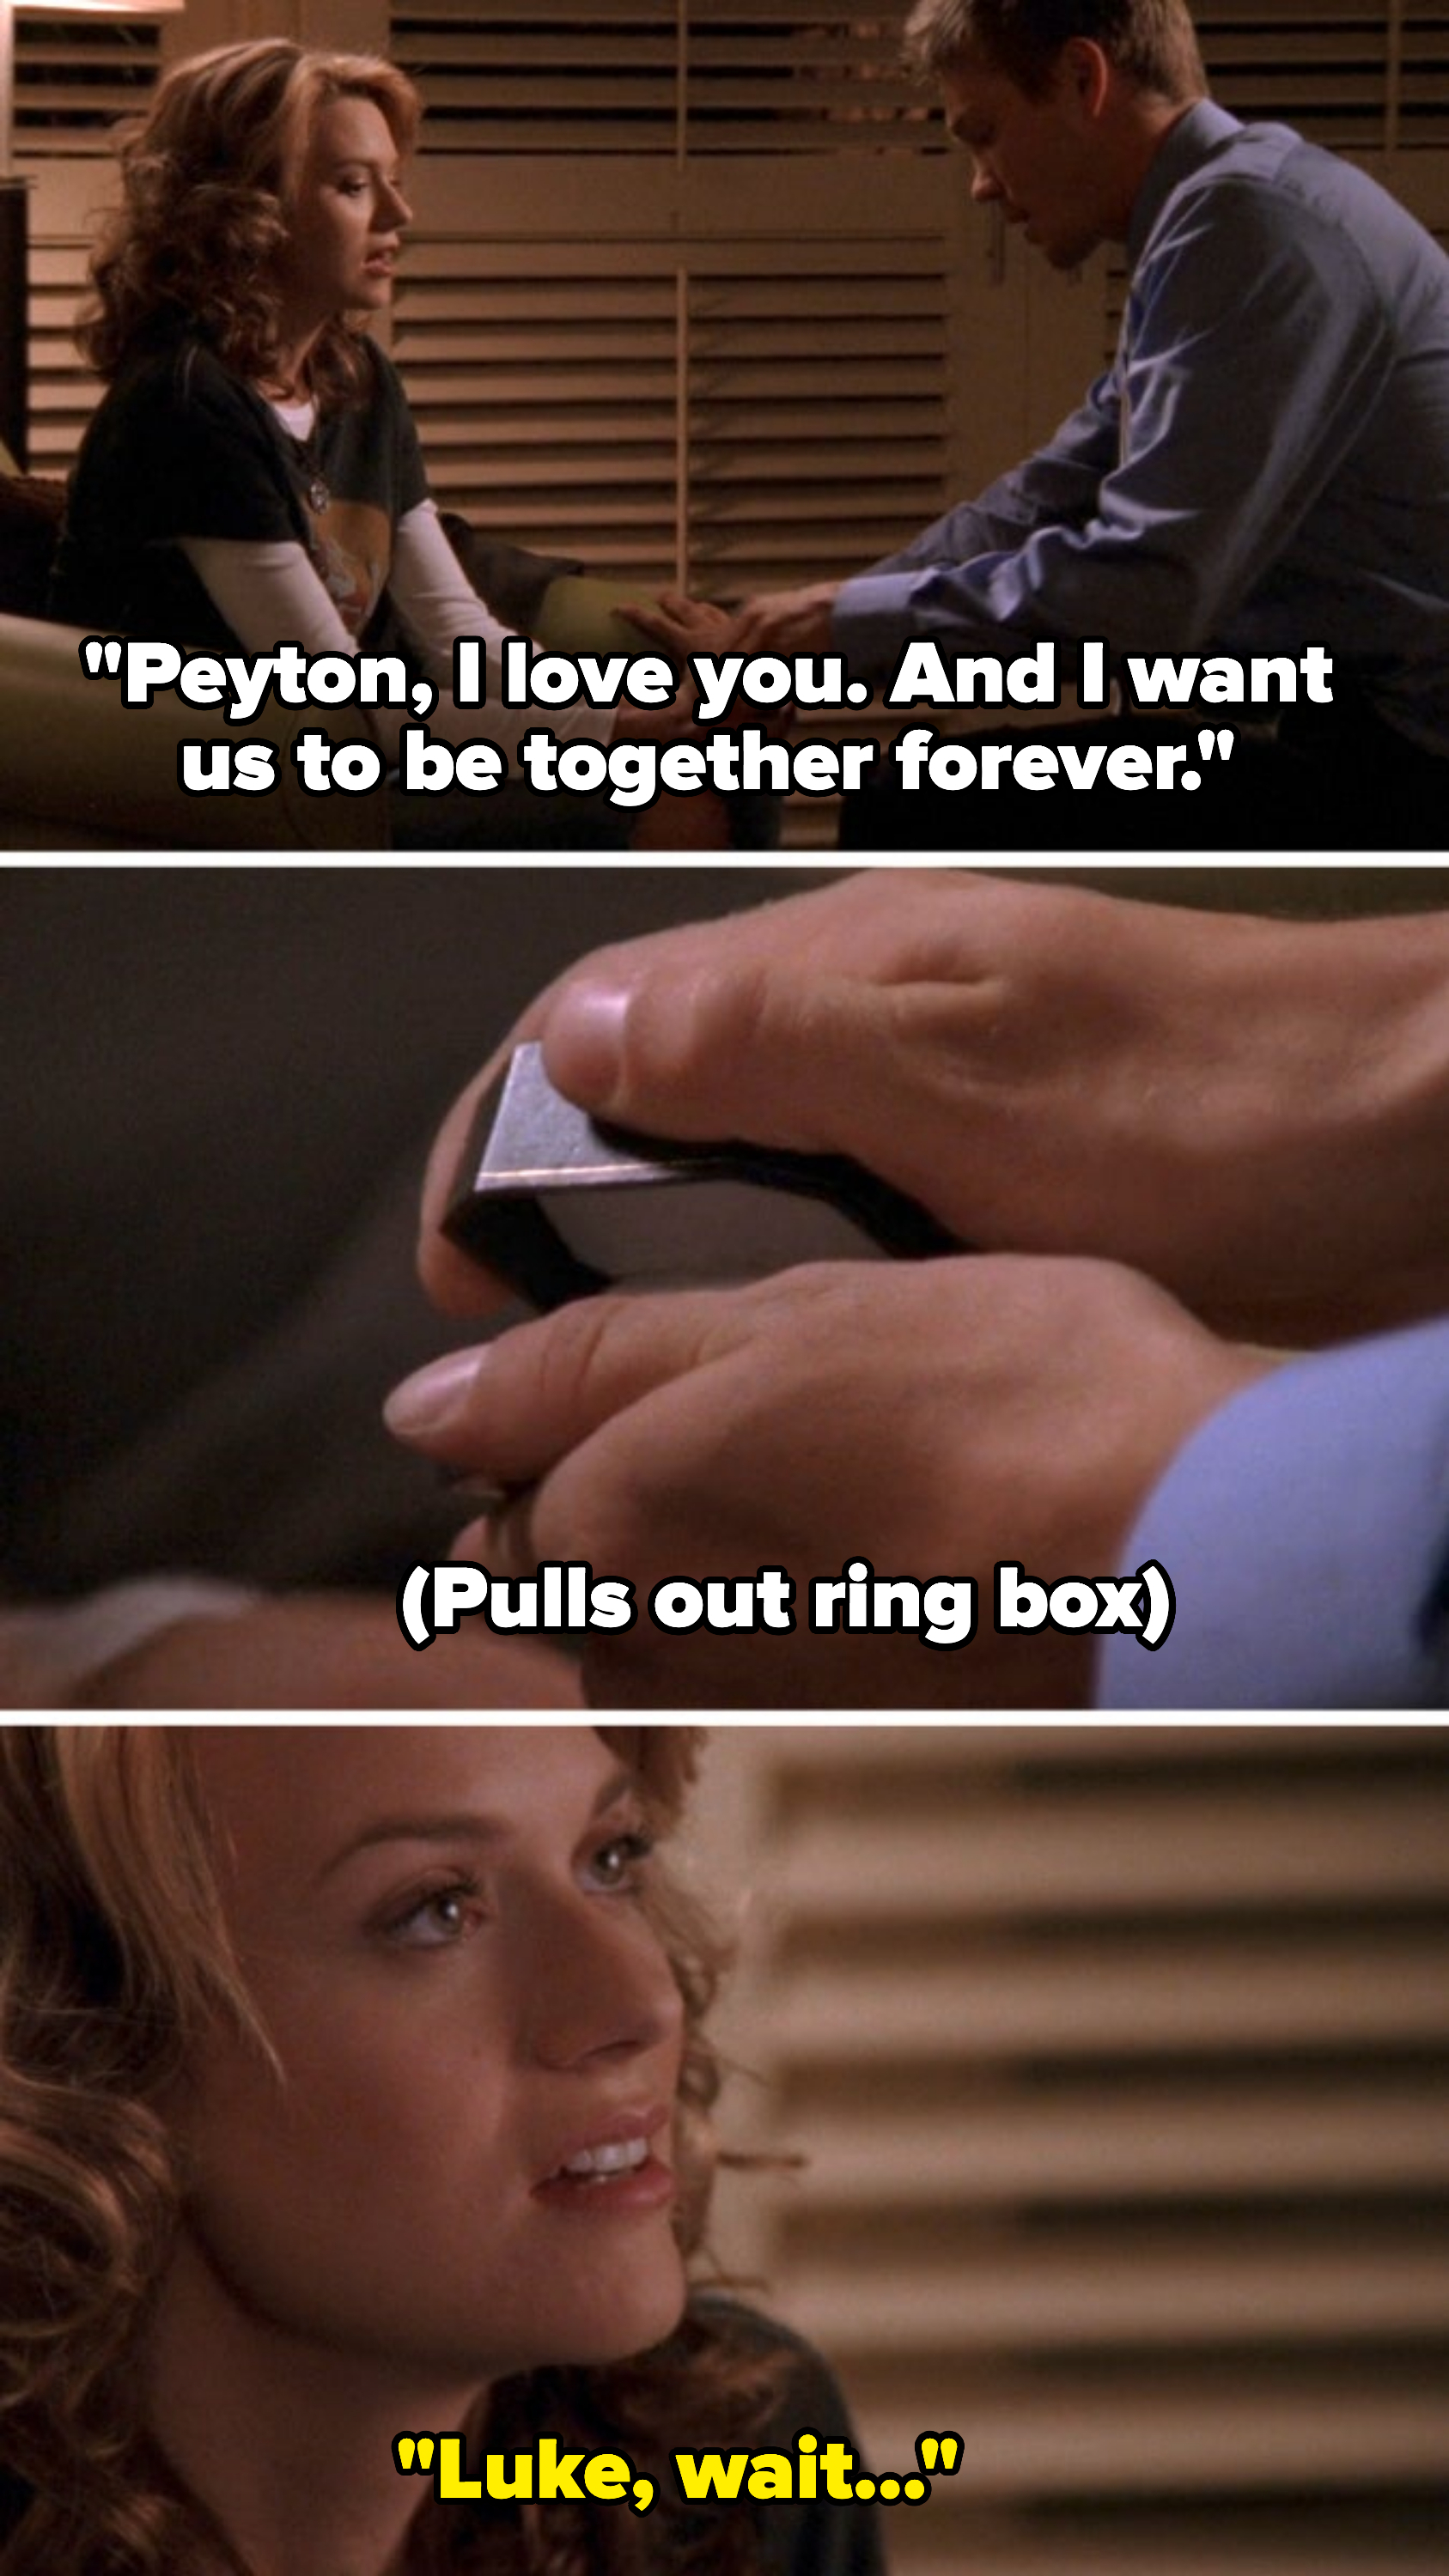 Luke on One Tree Hill says, &quot;Peyton, I love you, and I want us to be together forever&quot; and pulls out a ring box, and Peyton says, &quot;Luke, wait&quot;